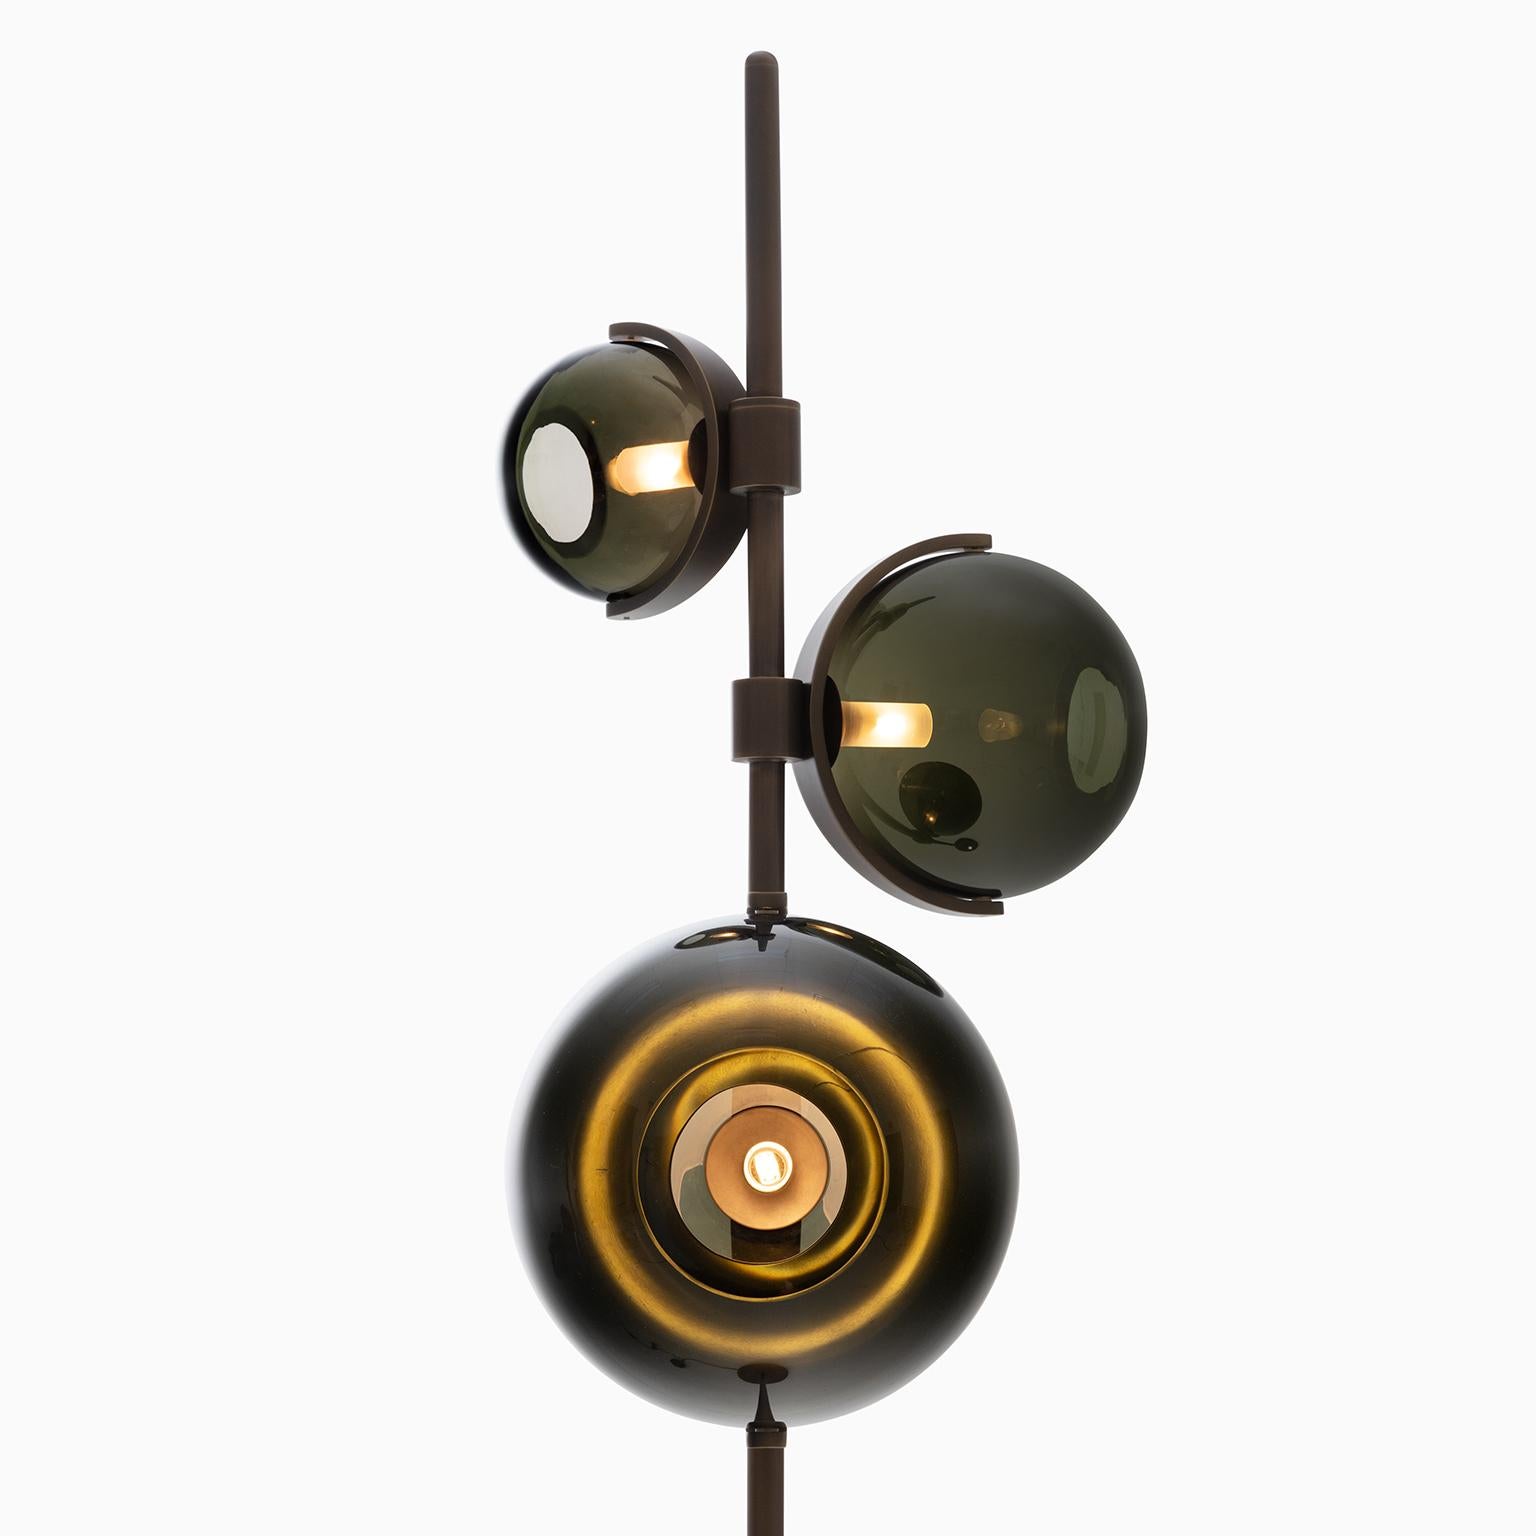 Holly Hunt Another Day floor lamp with brass & glass by Damien Langlois-Meurinne

Additional Information:
Materials: Brass, glass
Frame finish: Patinated bronze brass
Glass finish: Smoke grey glass
Diffuser: Glass
Illumination: Socket base,